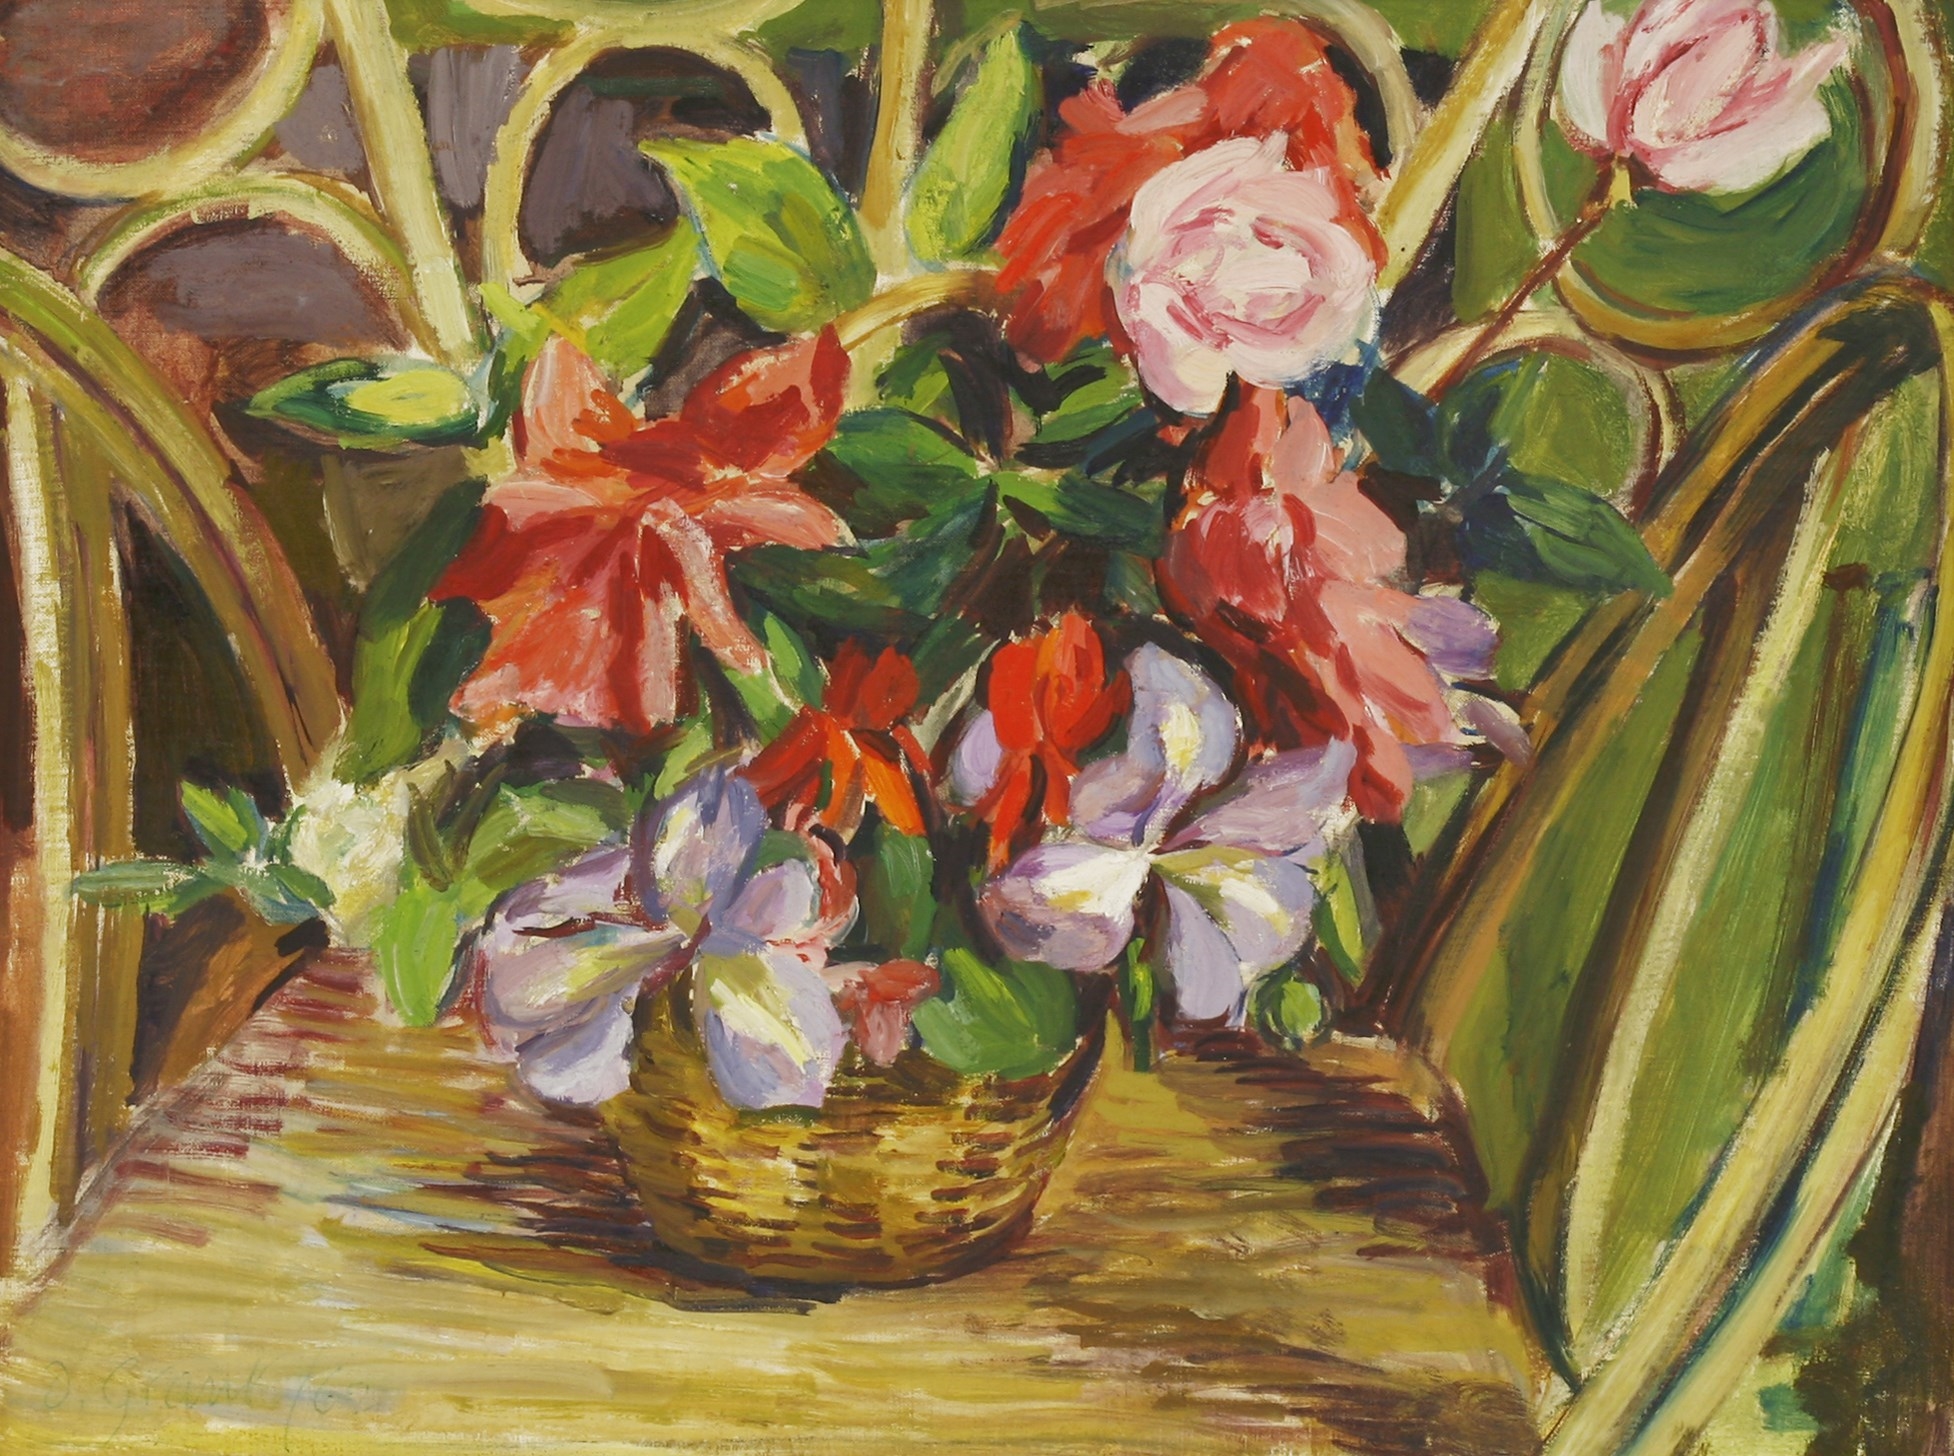 A STILL LIFE OF A BASKET OF FLOWERS ON A CHAIR by Duncan Grant, 1962